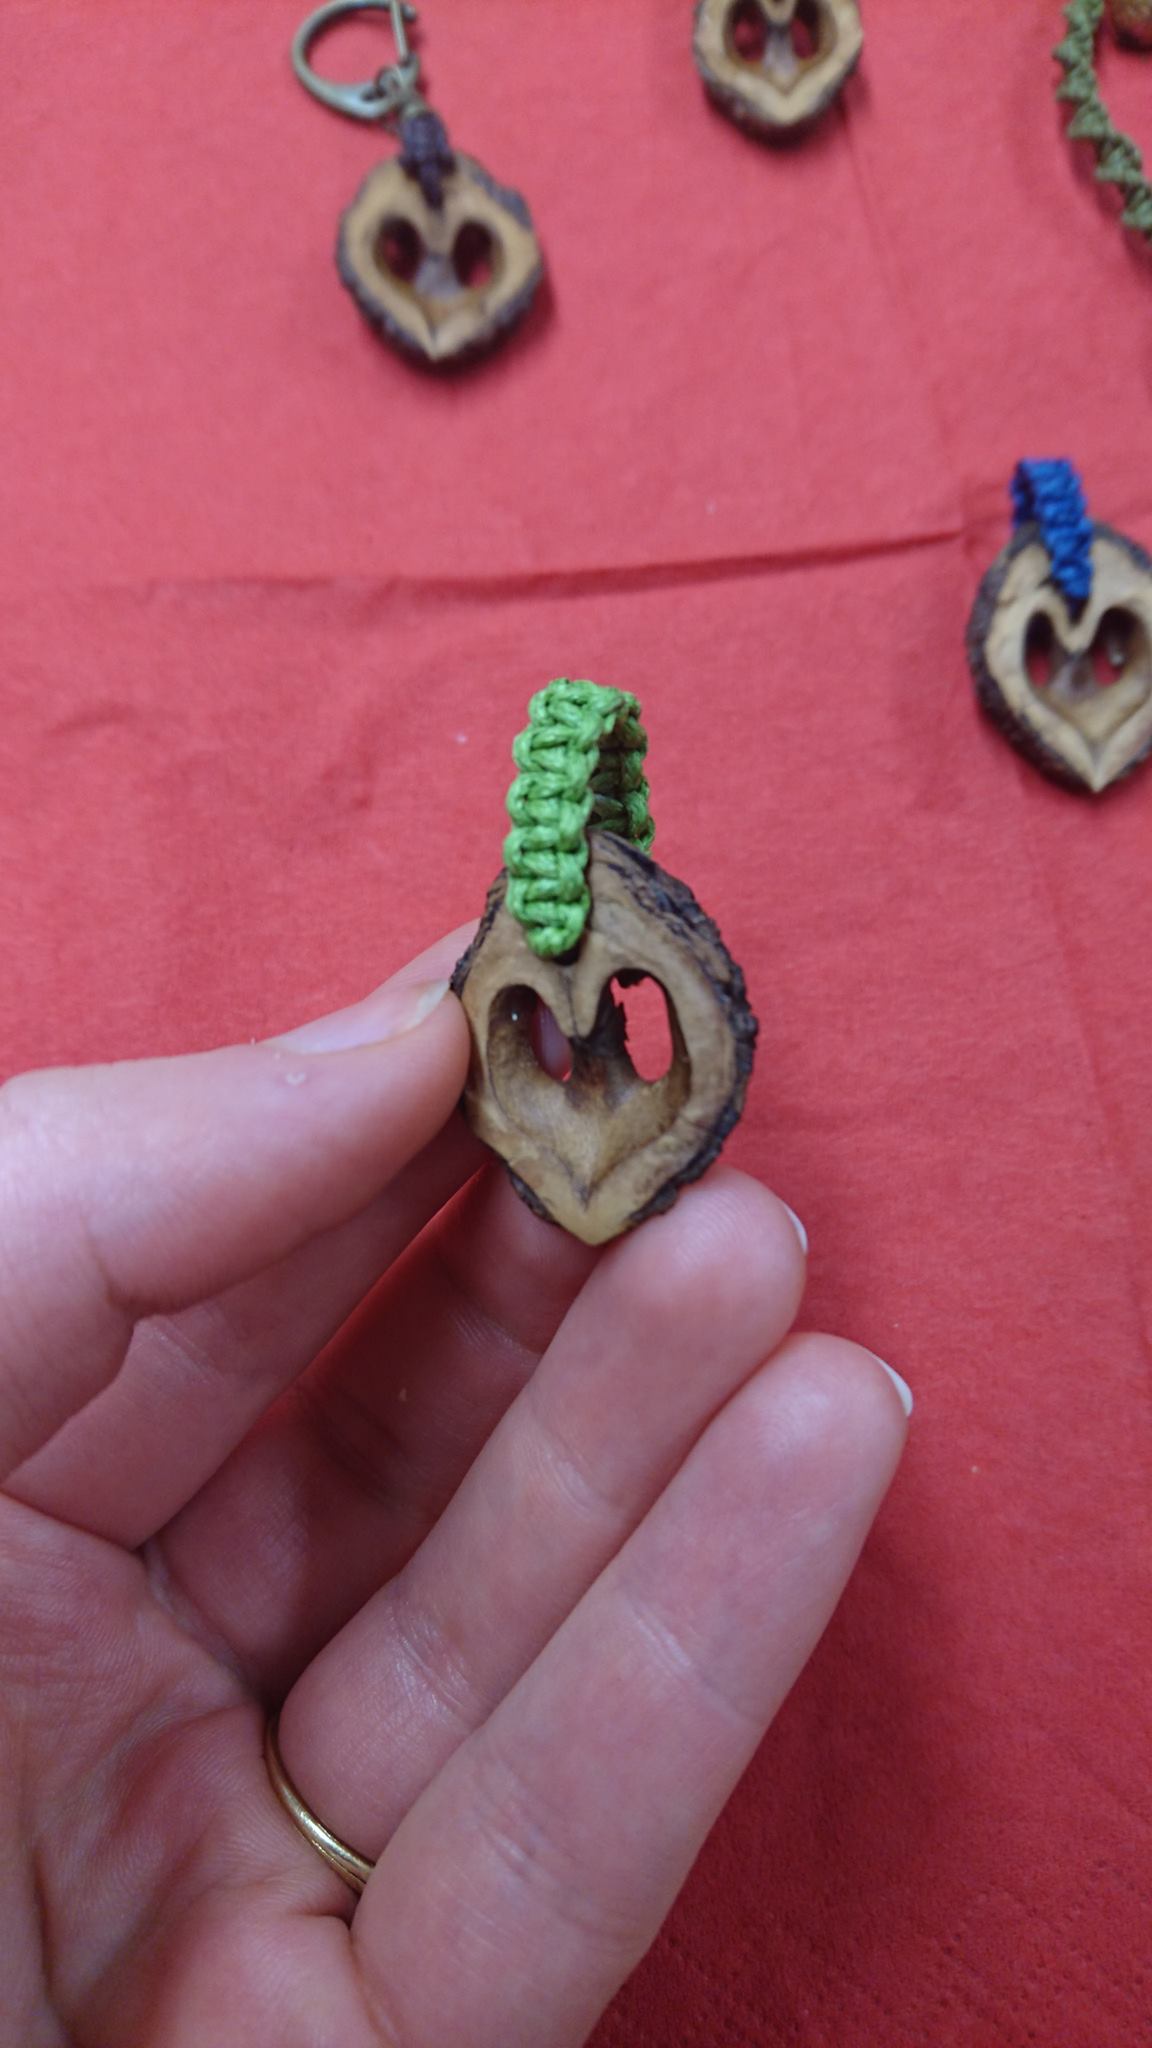 Heart made from tree seeds